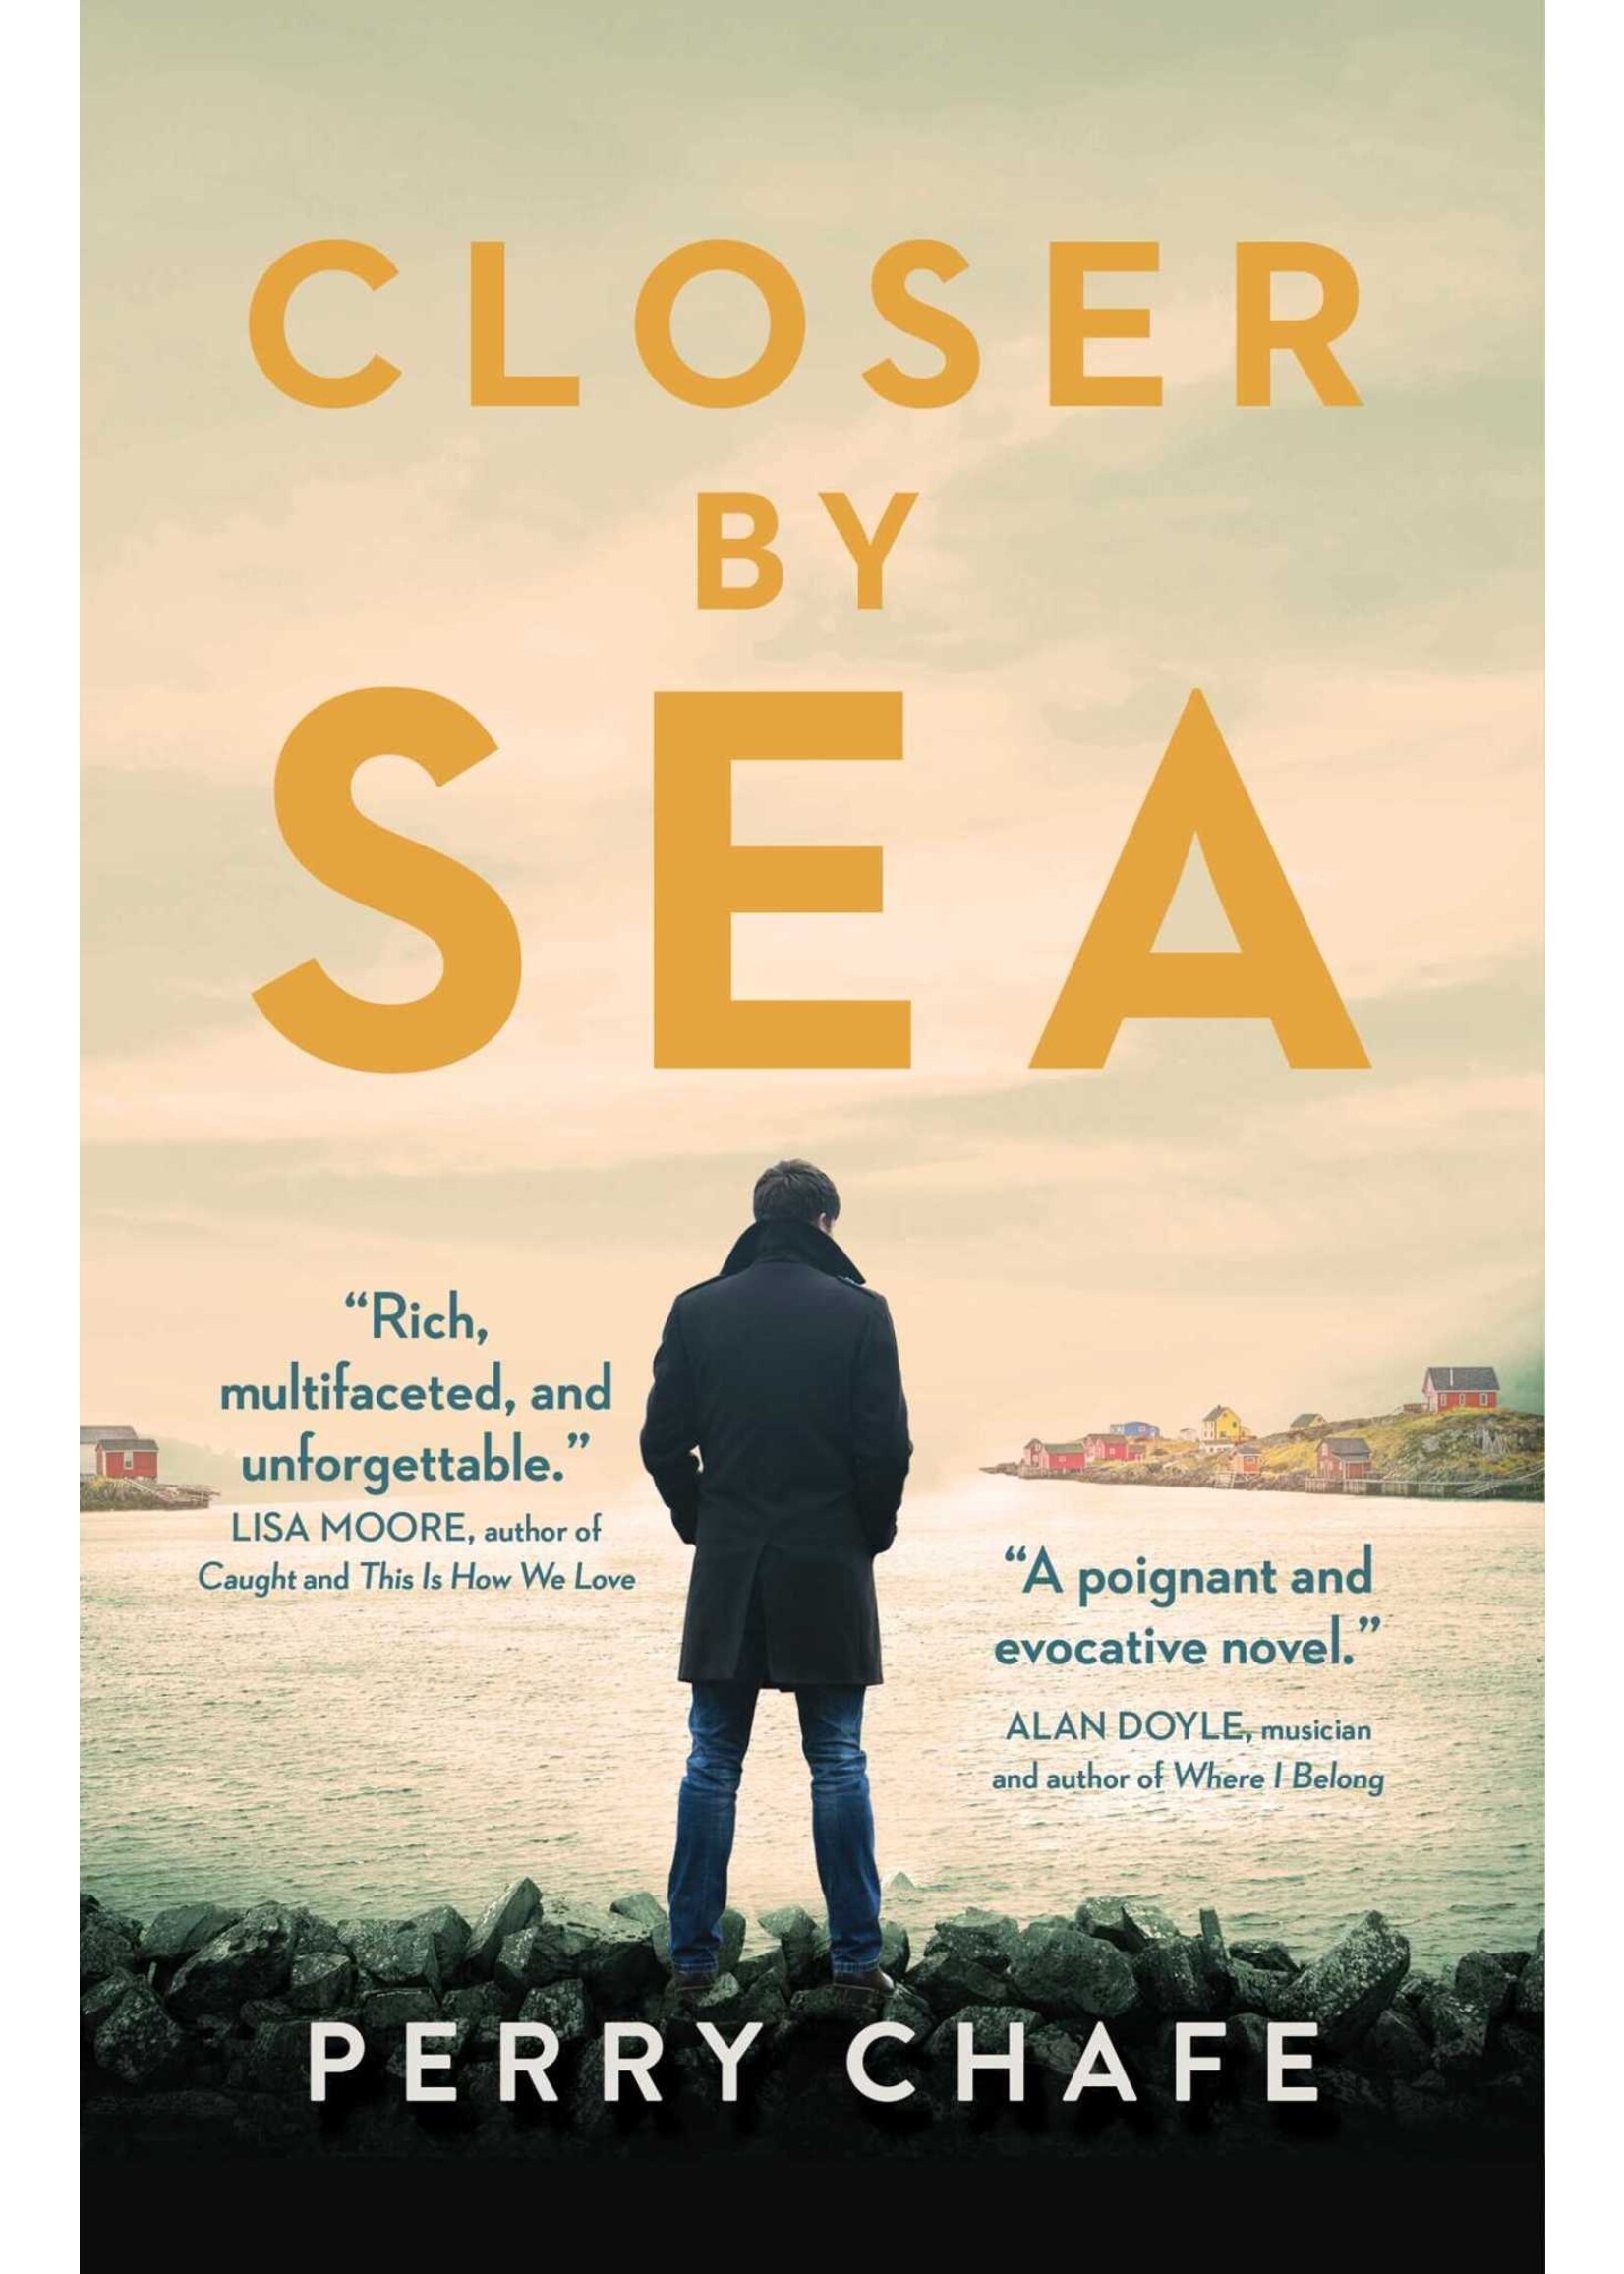 Closer by Sea by Perry Chafe